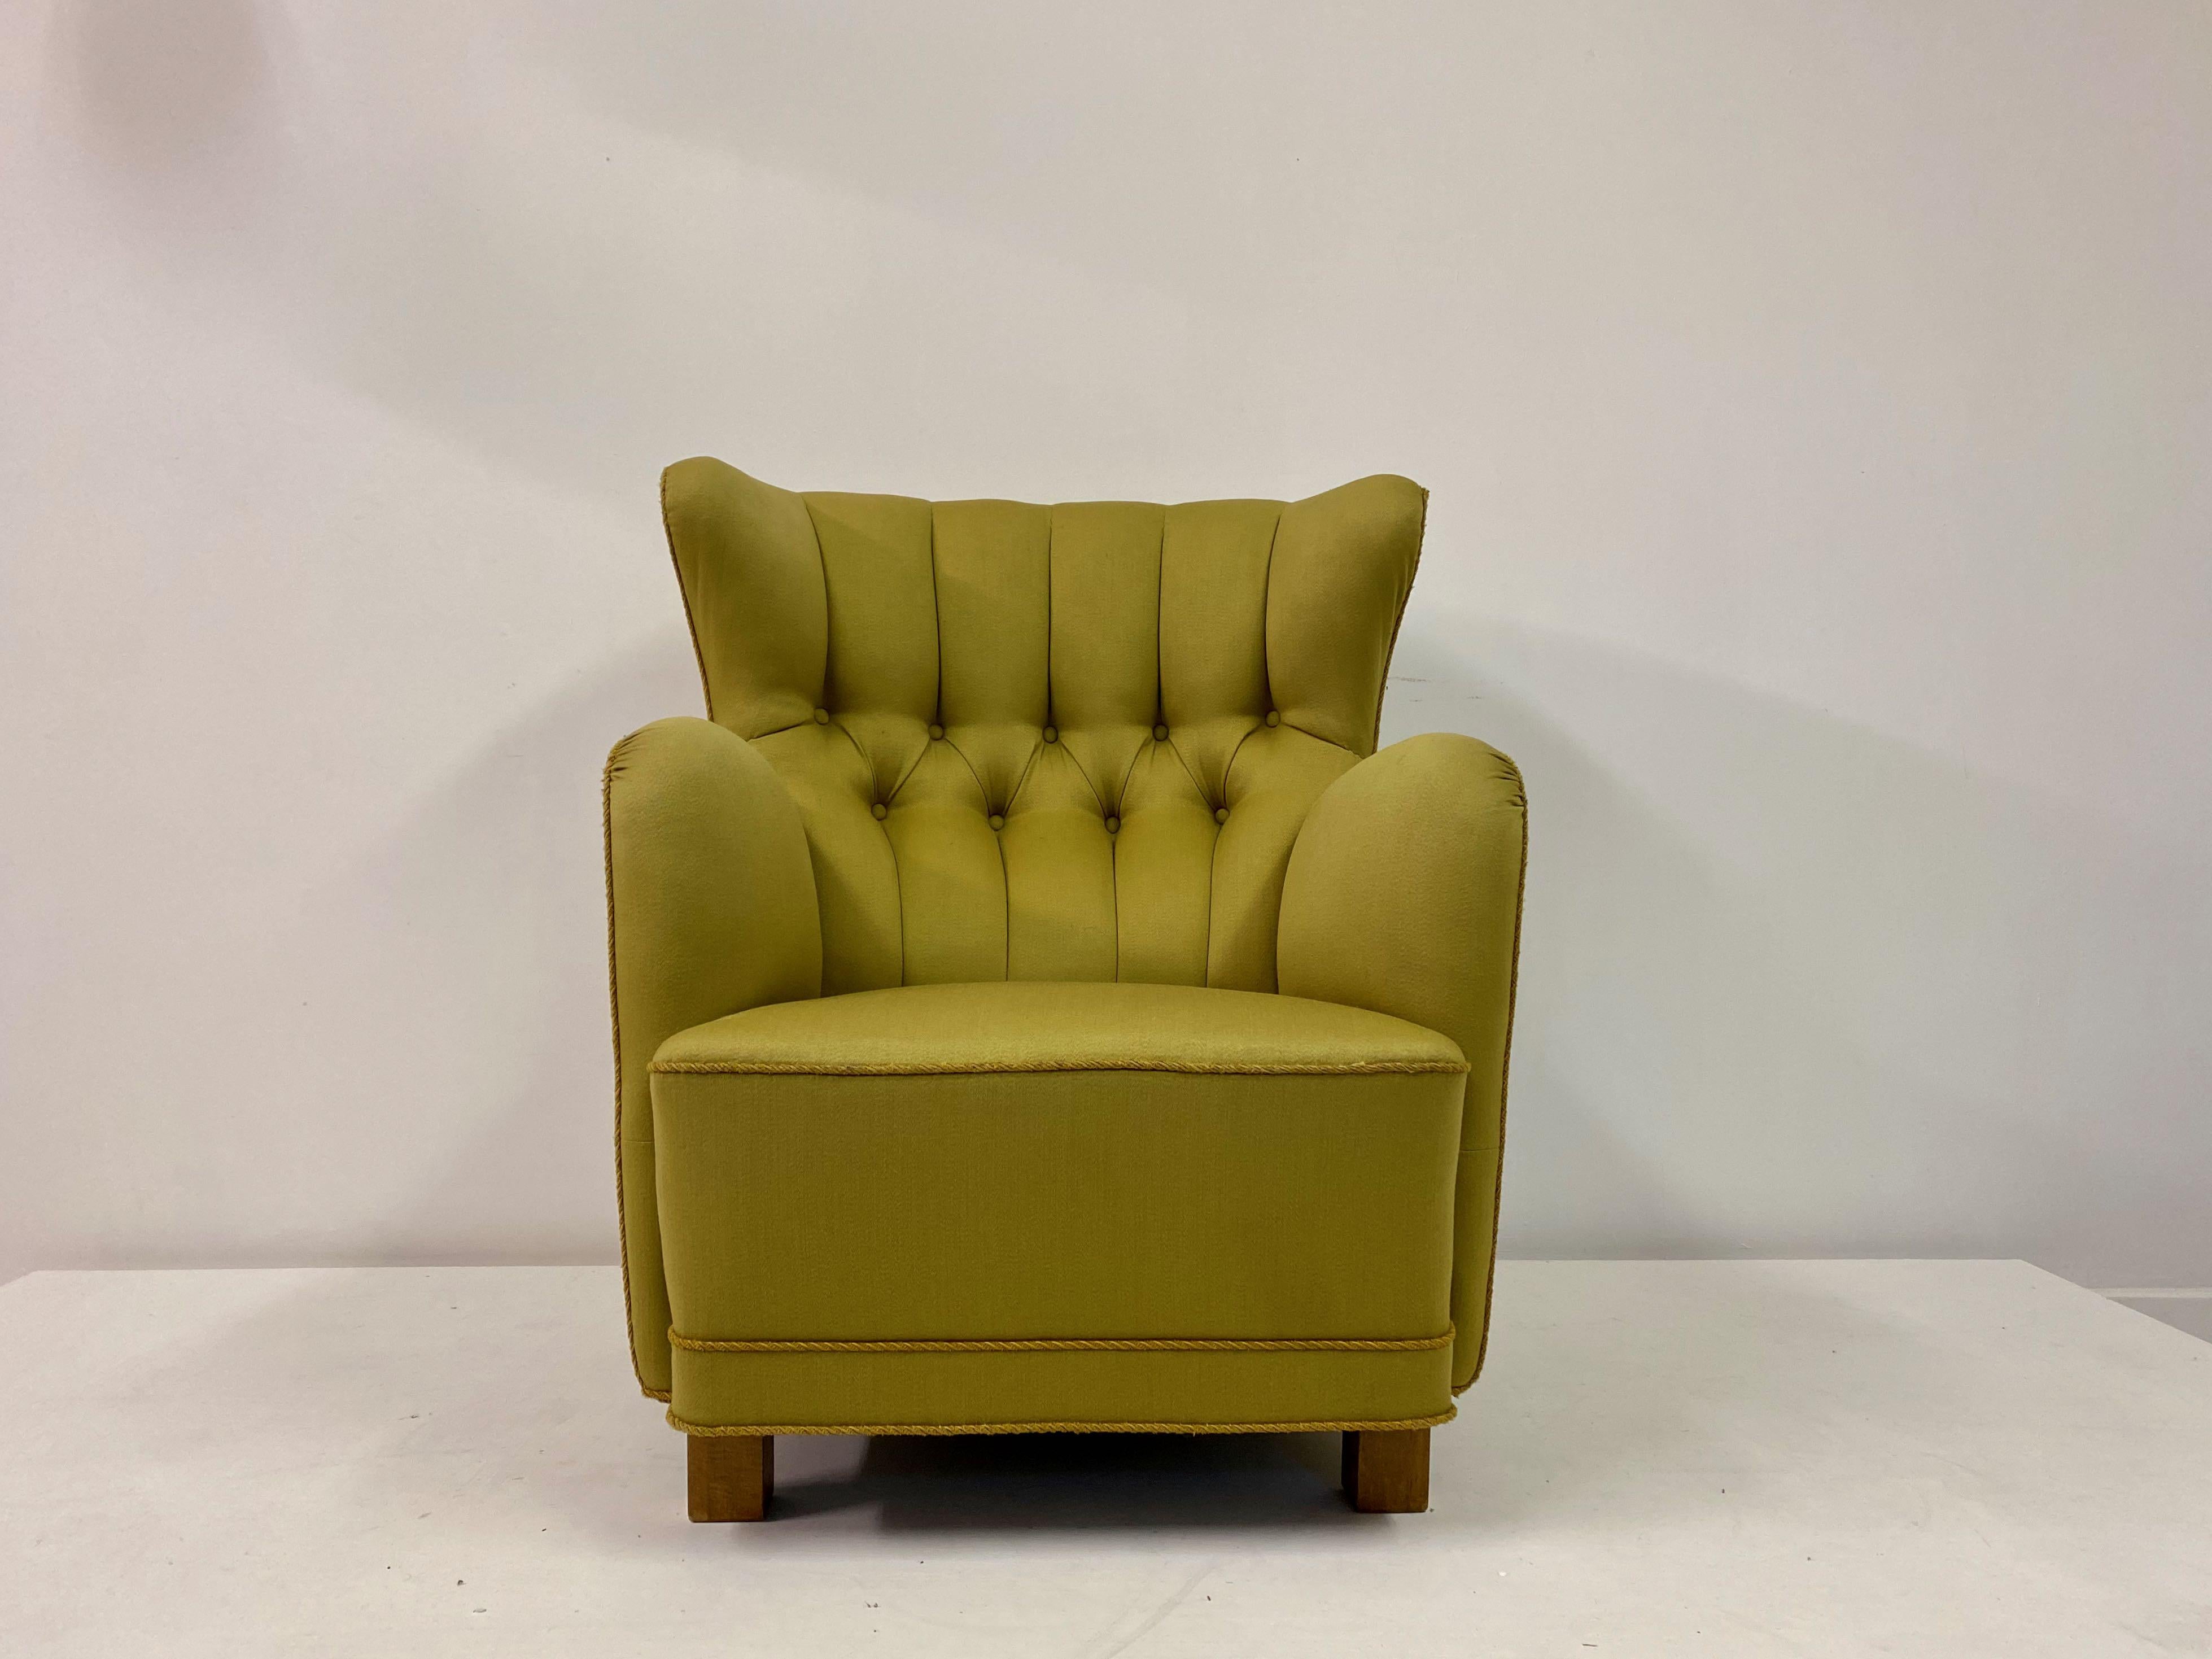 Easy chair

Large size

Beech legs

Green upholstery

Danish, 1930s/40s

Measures: Seat height 40cm.